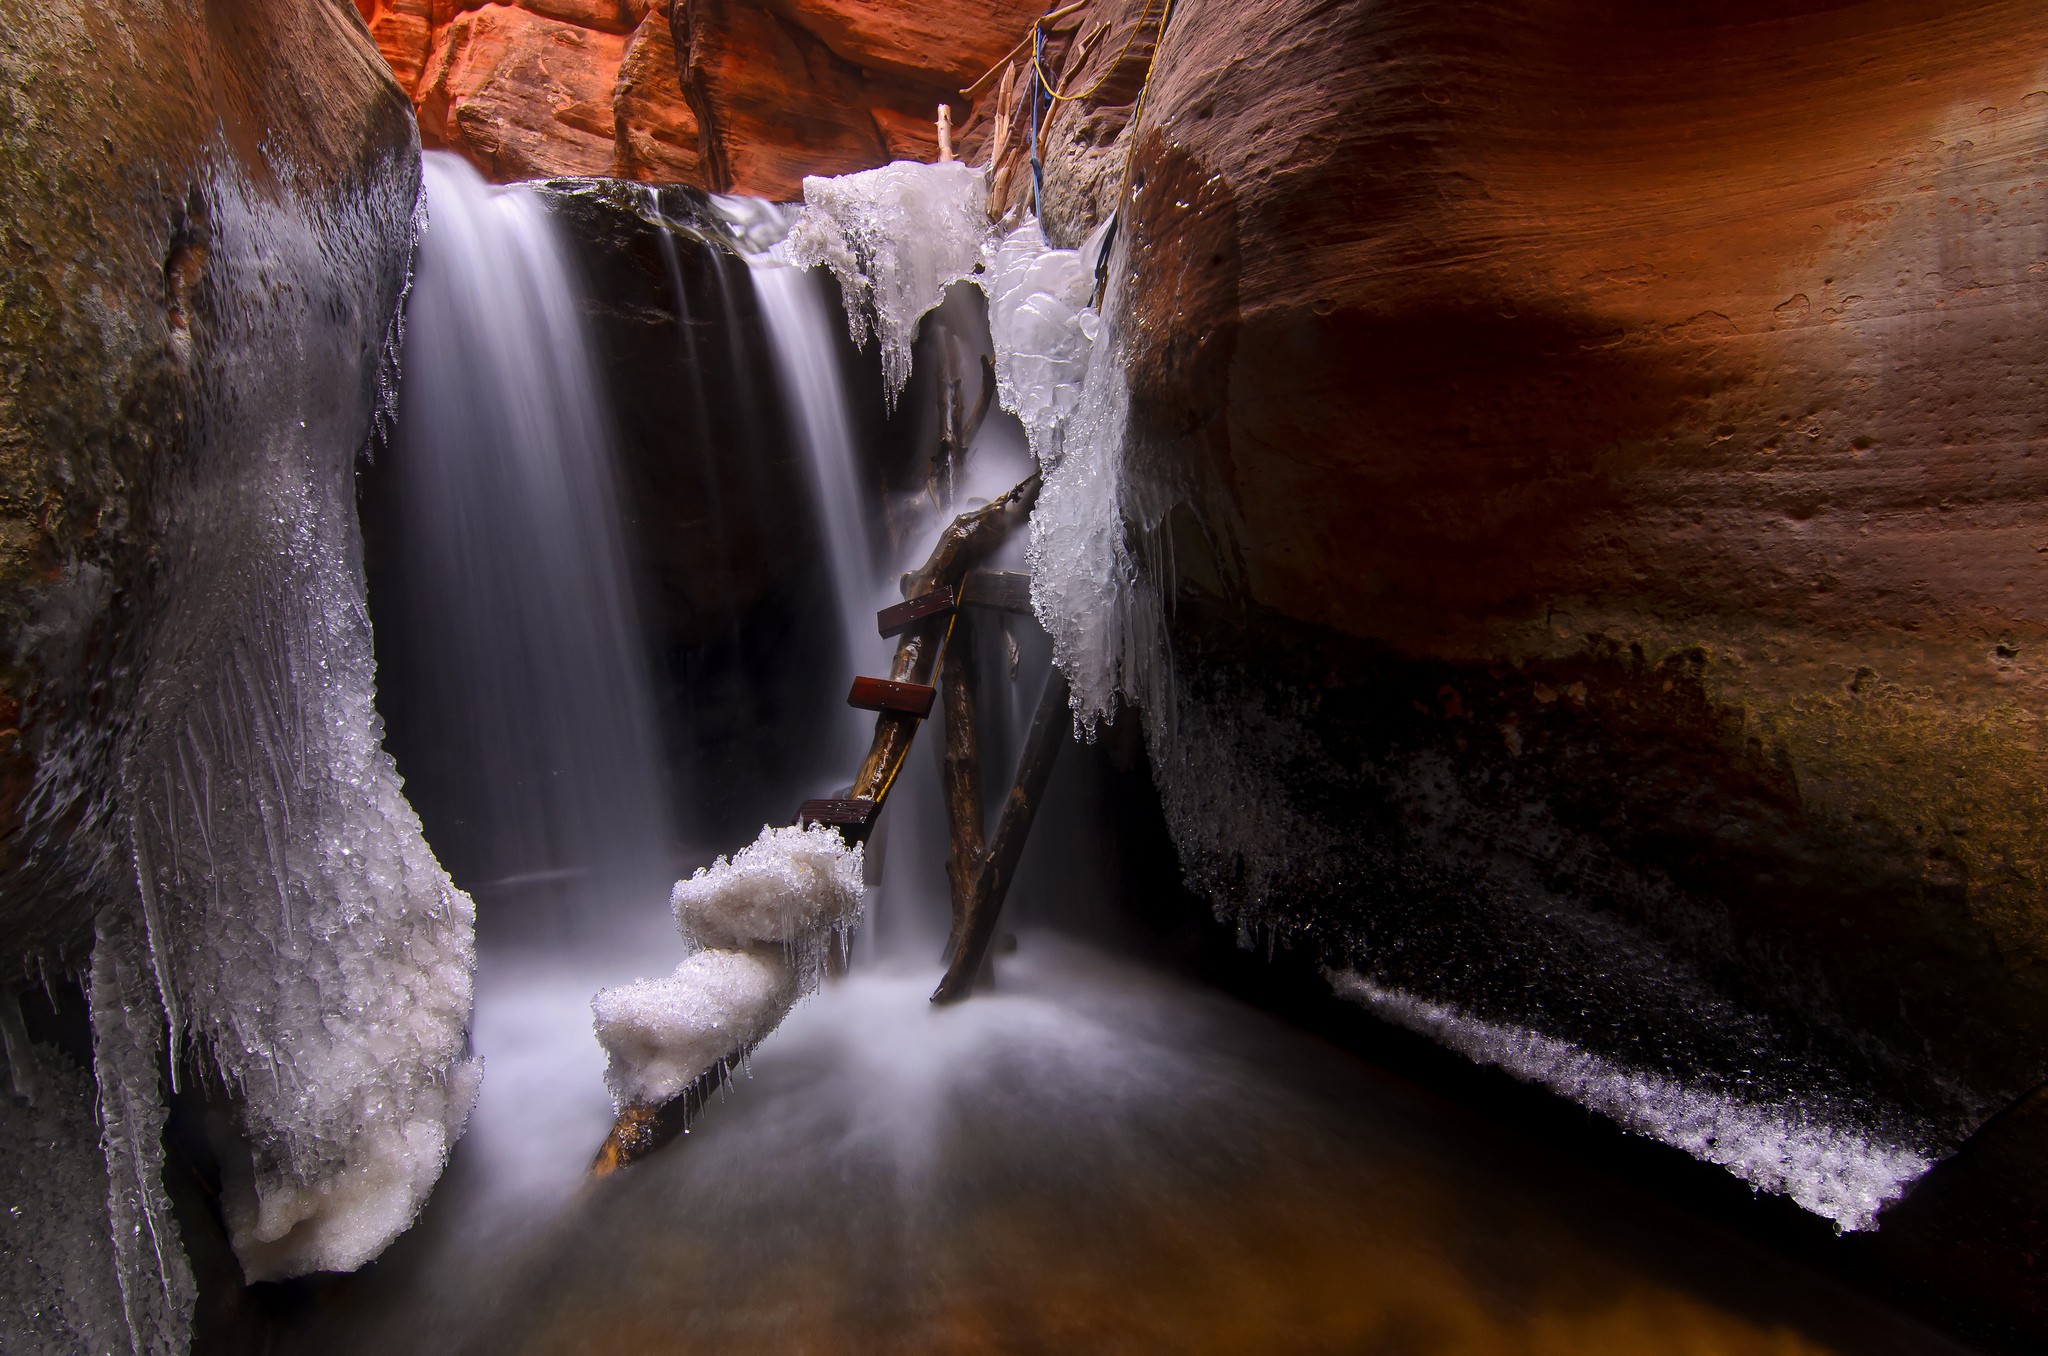 General 2048x1356 cave ice water rocks nature frost canyon waterfall